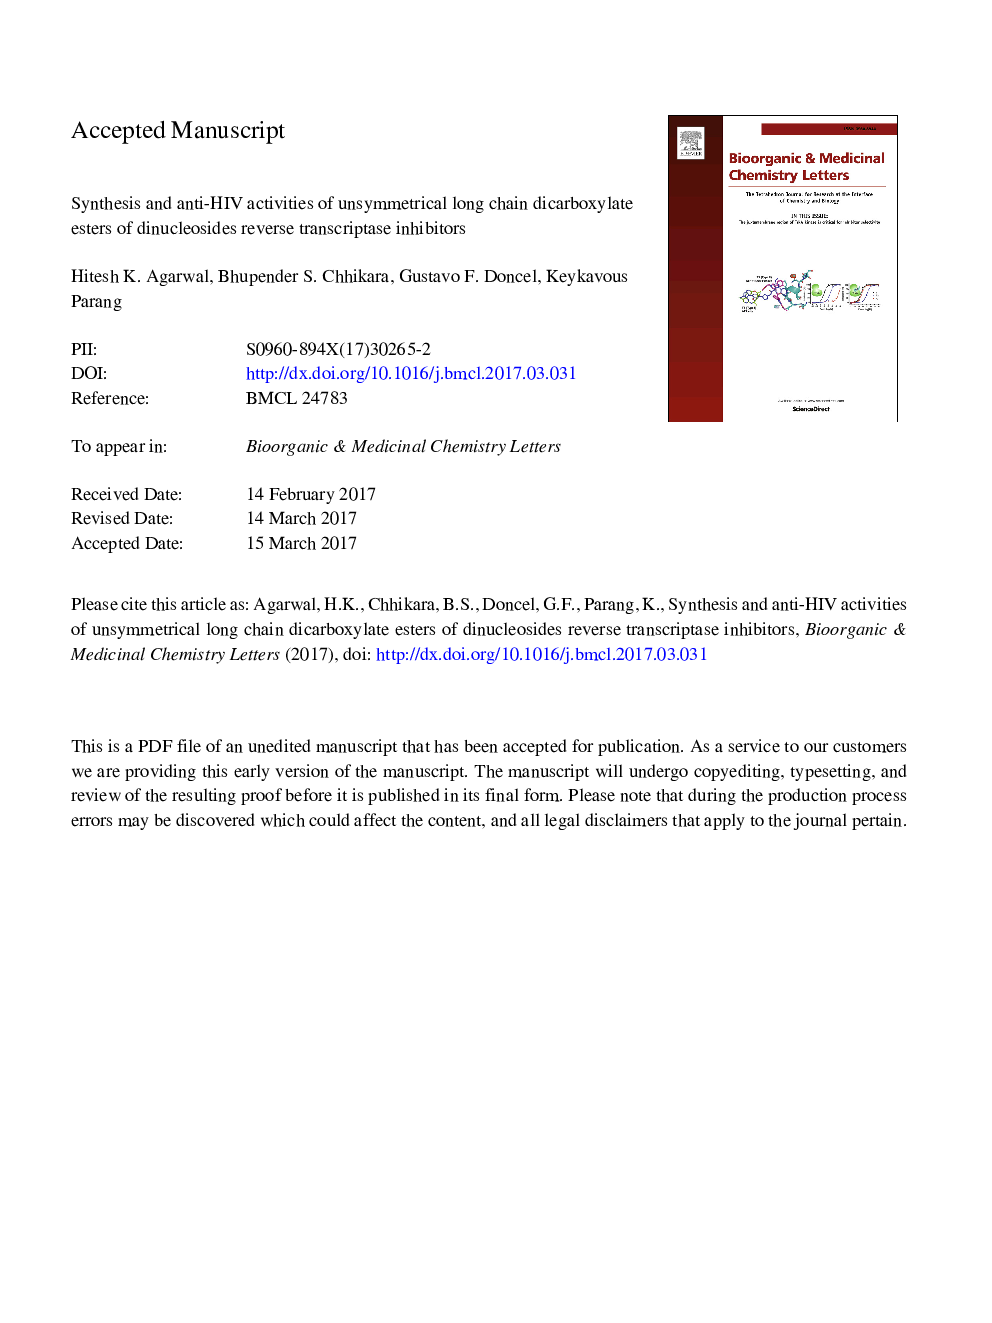 Synthesis and anti-HIV activities of unsymmetrical long chain dicarboxylate esters of dinucleoside reverse transcriptase inhibitors